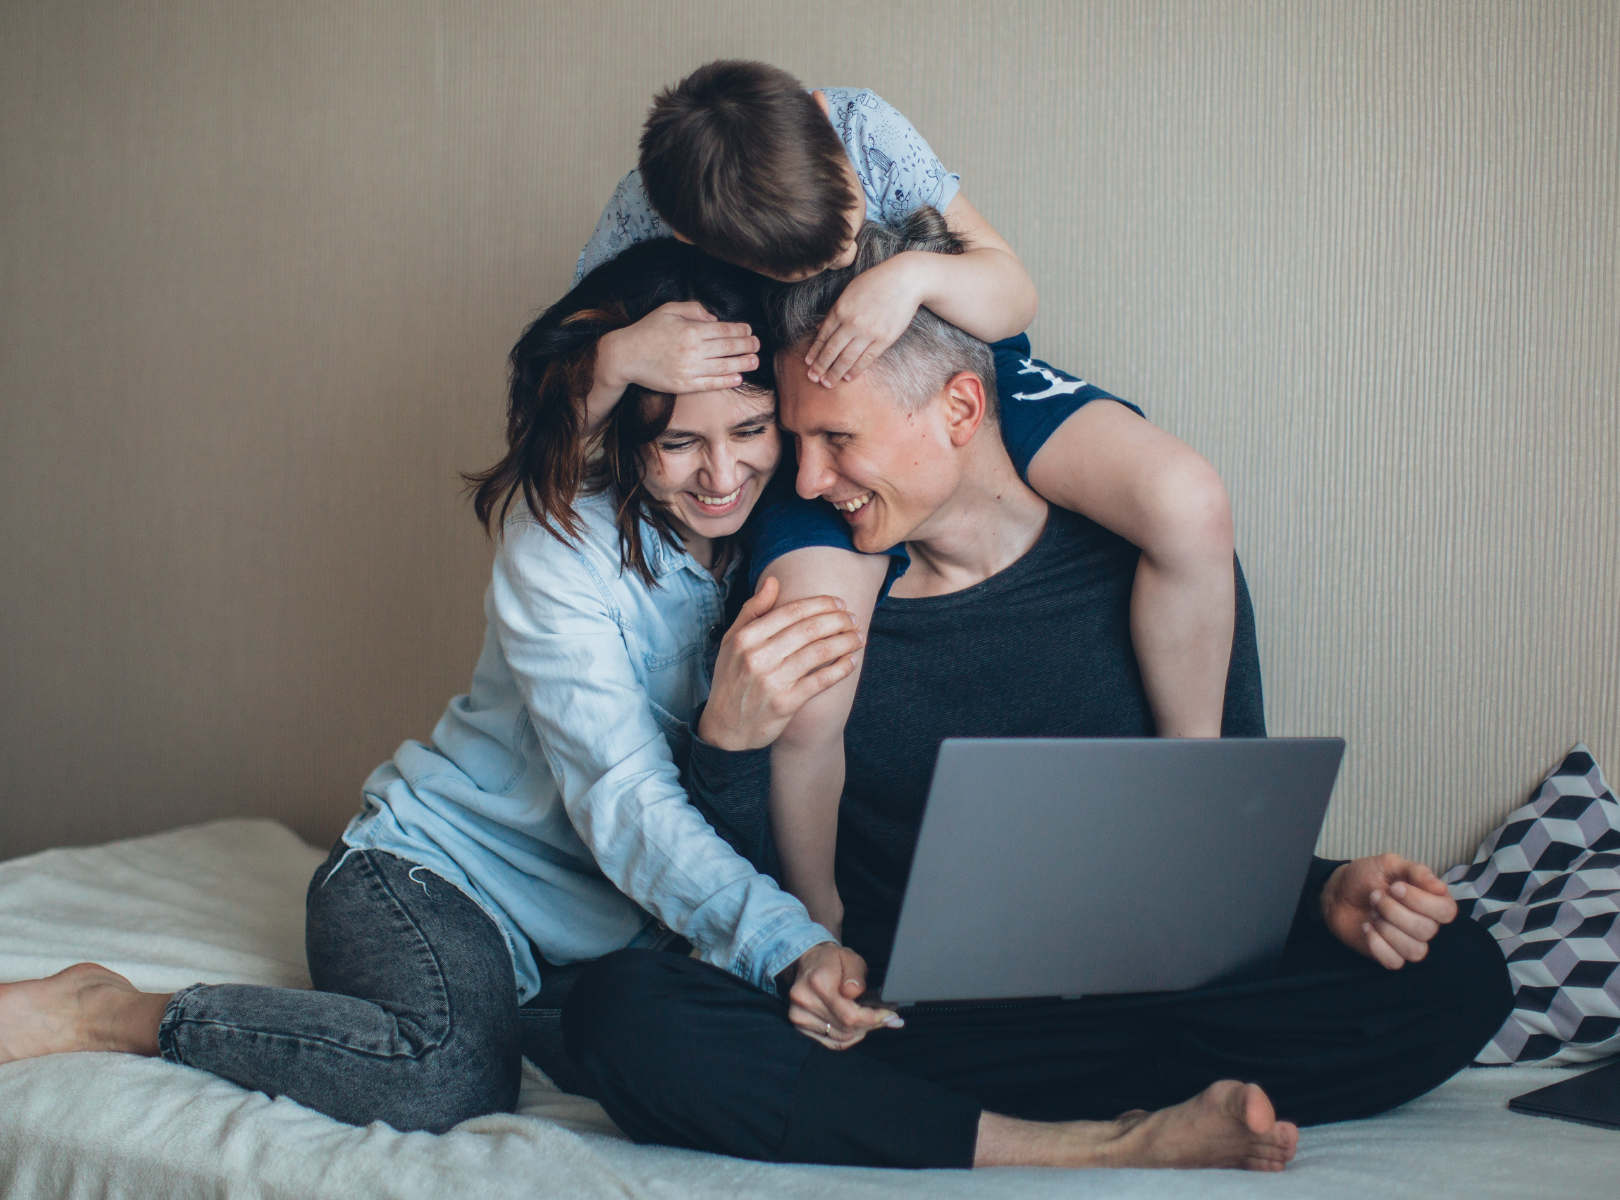 American Health Plans | Mom and Dad laughing on bed with child holding them both